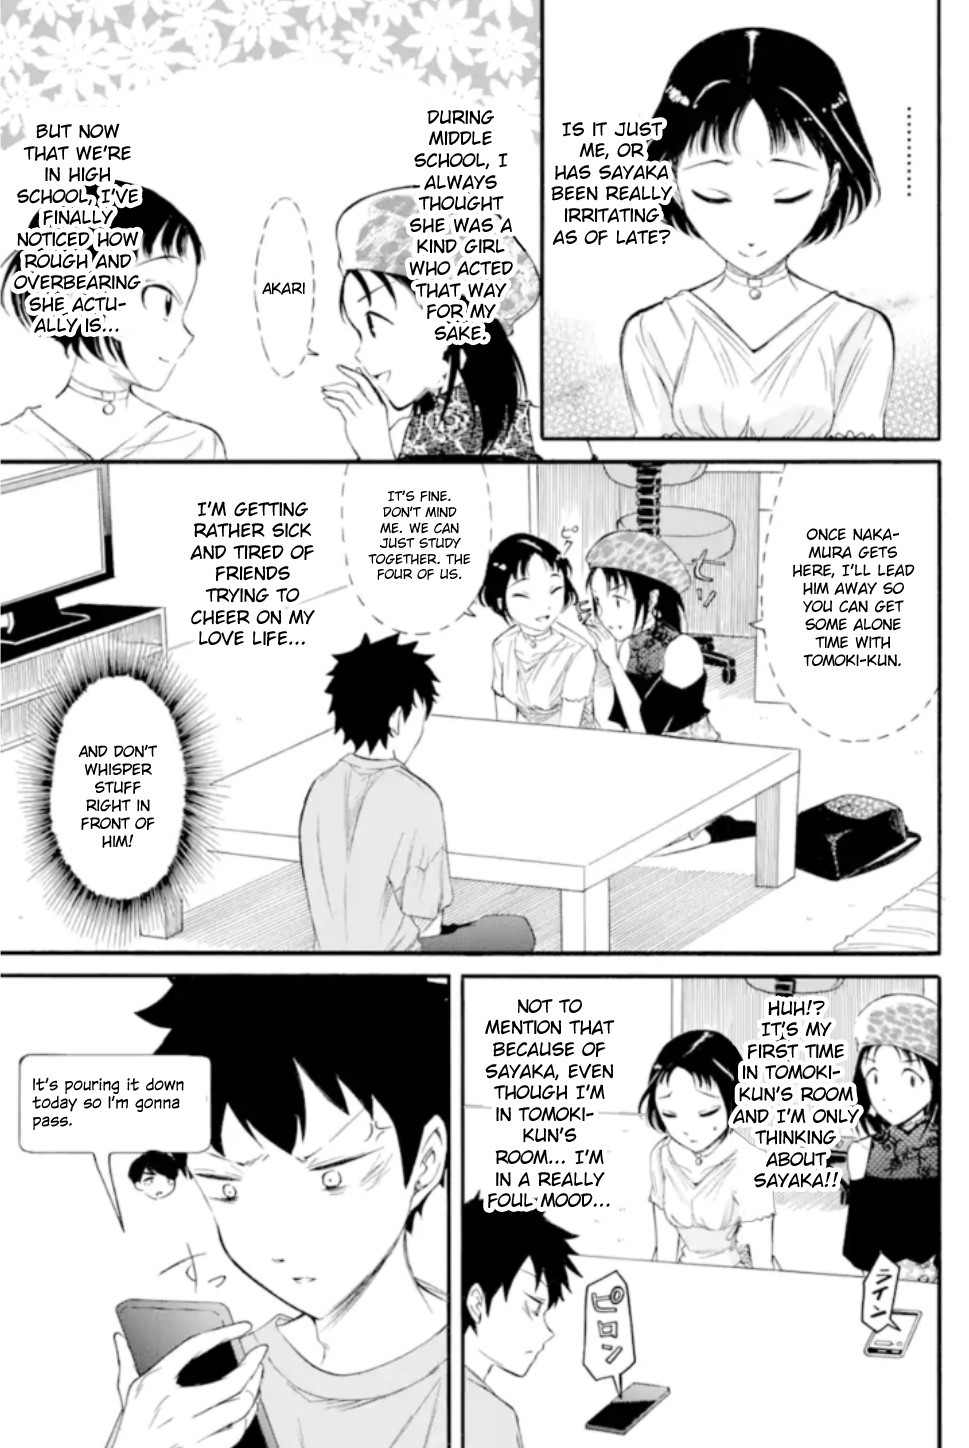 It's Not My Fault That I'm Not Popular! Chapter 168: Since I'm Not Popular, There's A Gathering In My Lil Bro's Room - Picture 3